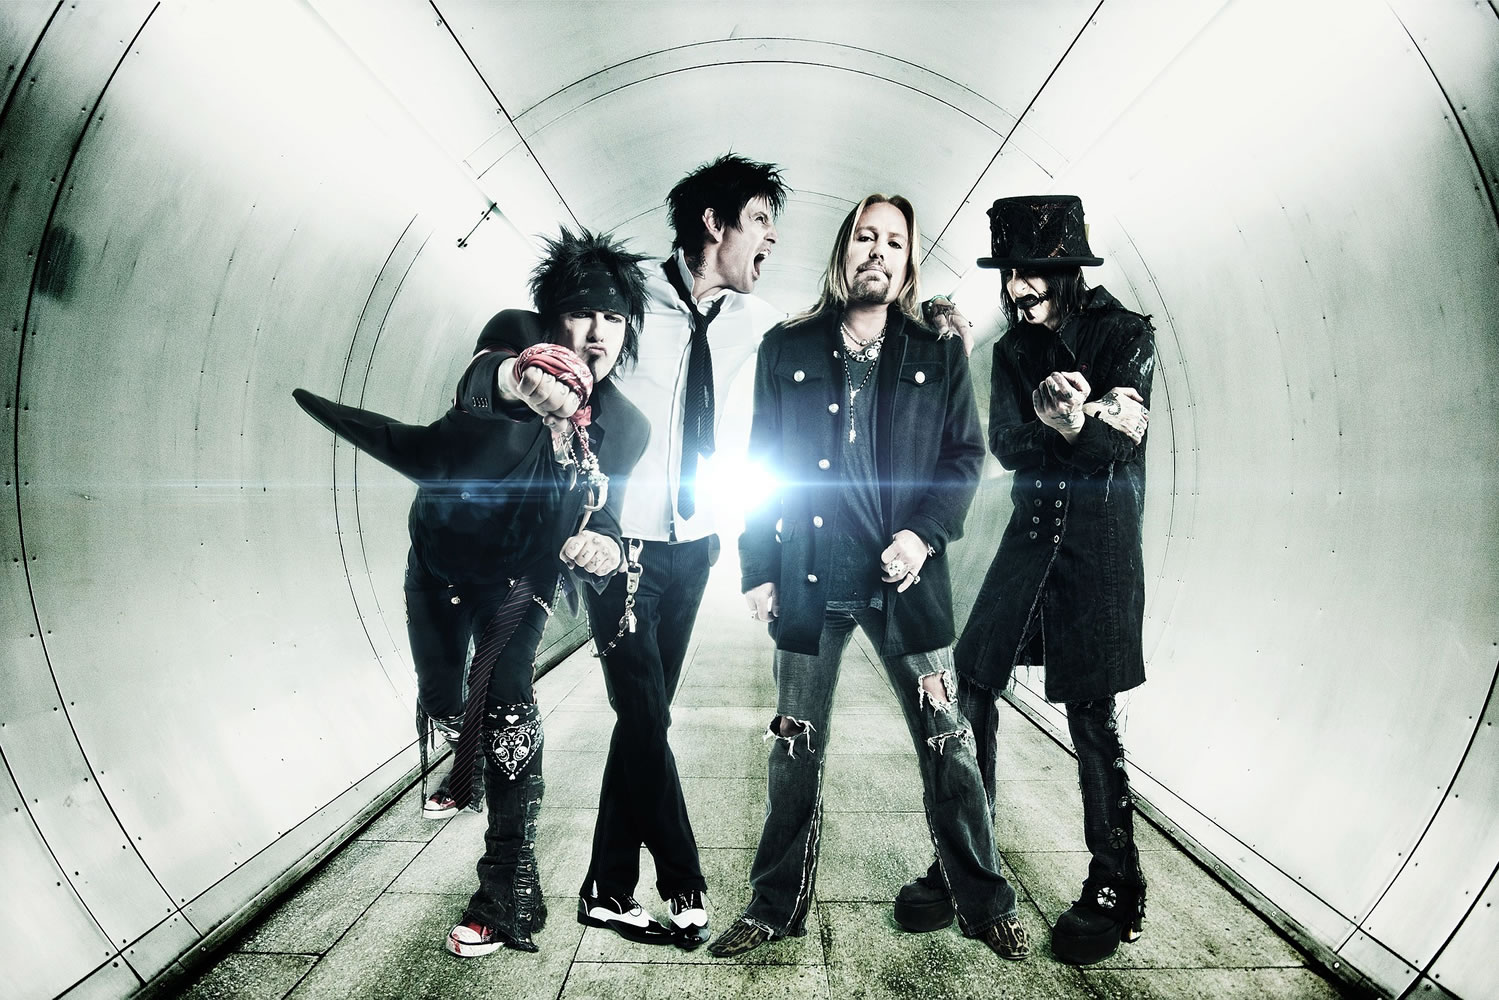 Hard rock band Motley Crue will perform July 26 at the Sleep Country Amphitheater in Ridgefield.